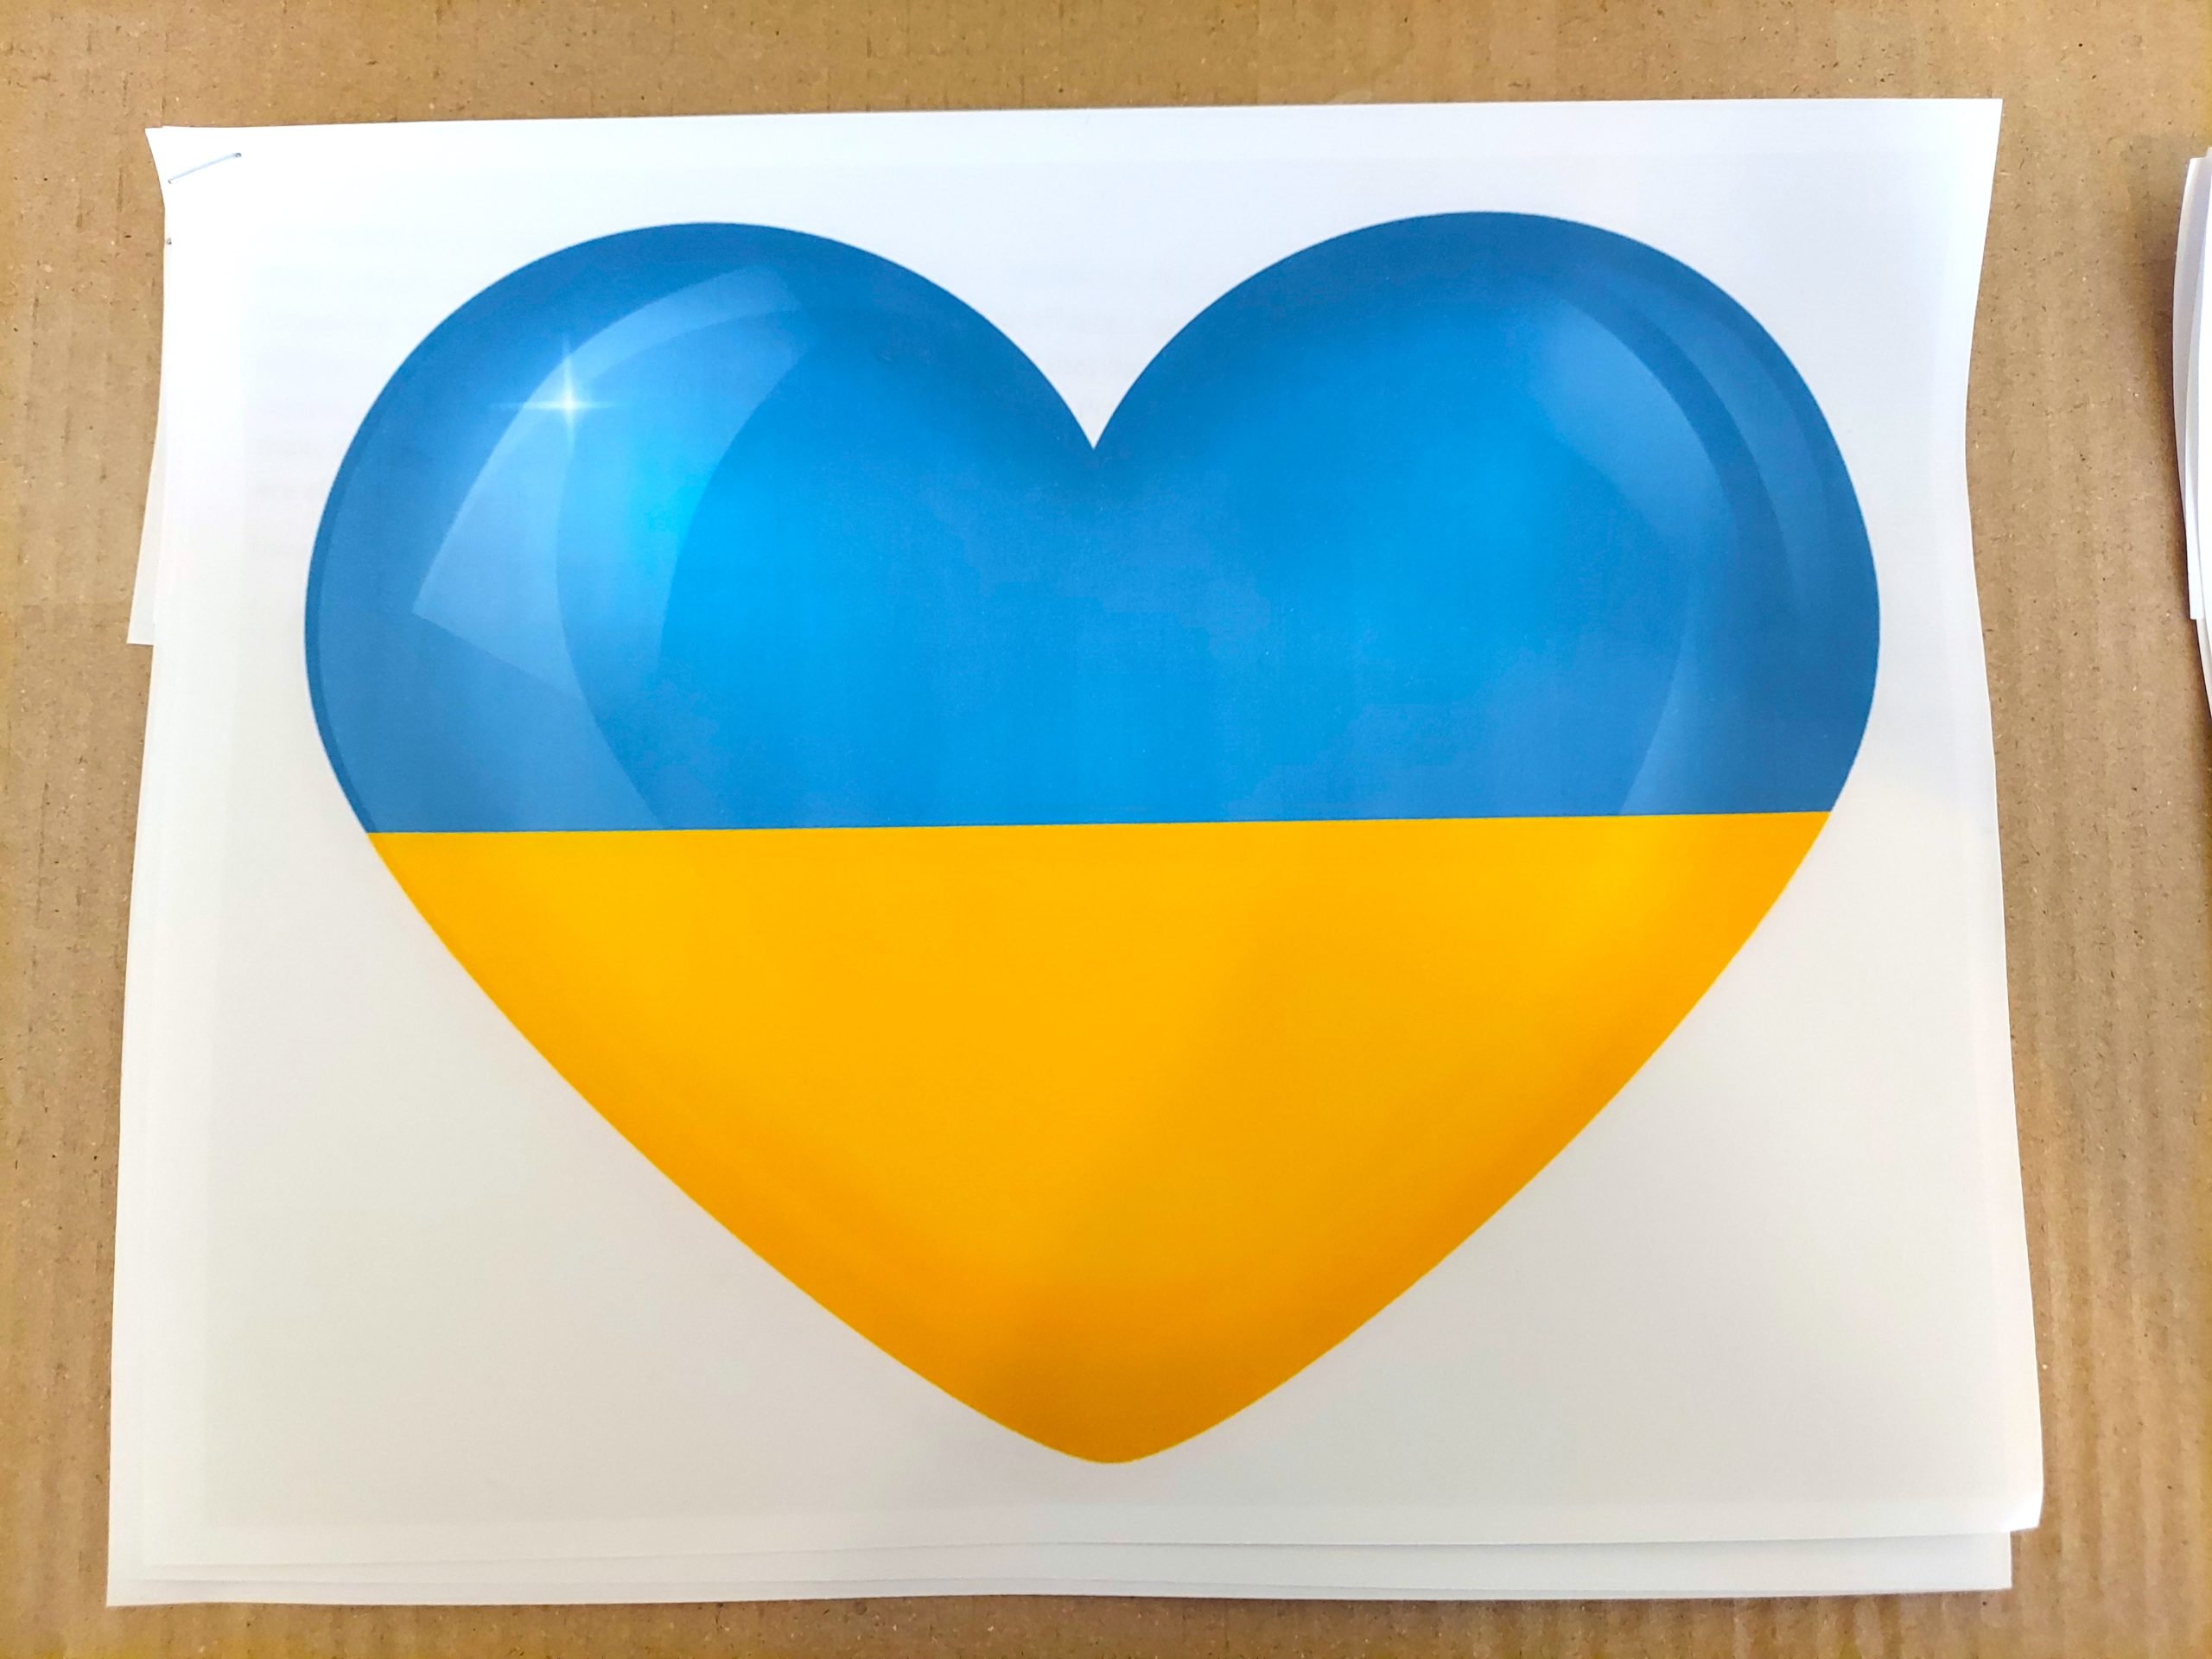 A Murray family is showing its support for Ukraine. The family is making hearts with the colors of ...